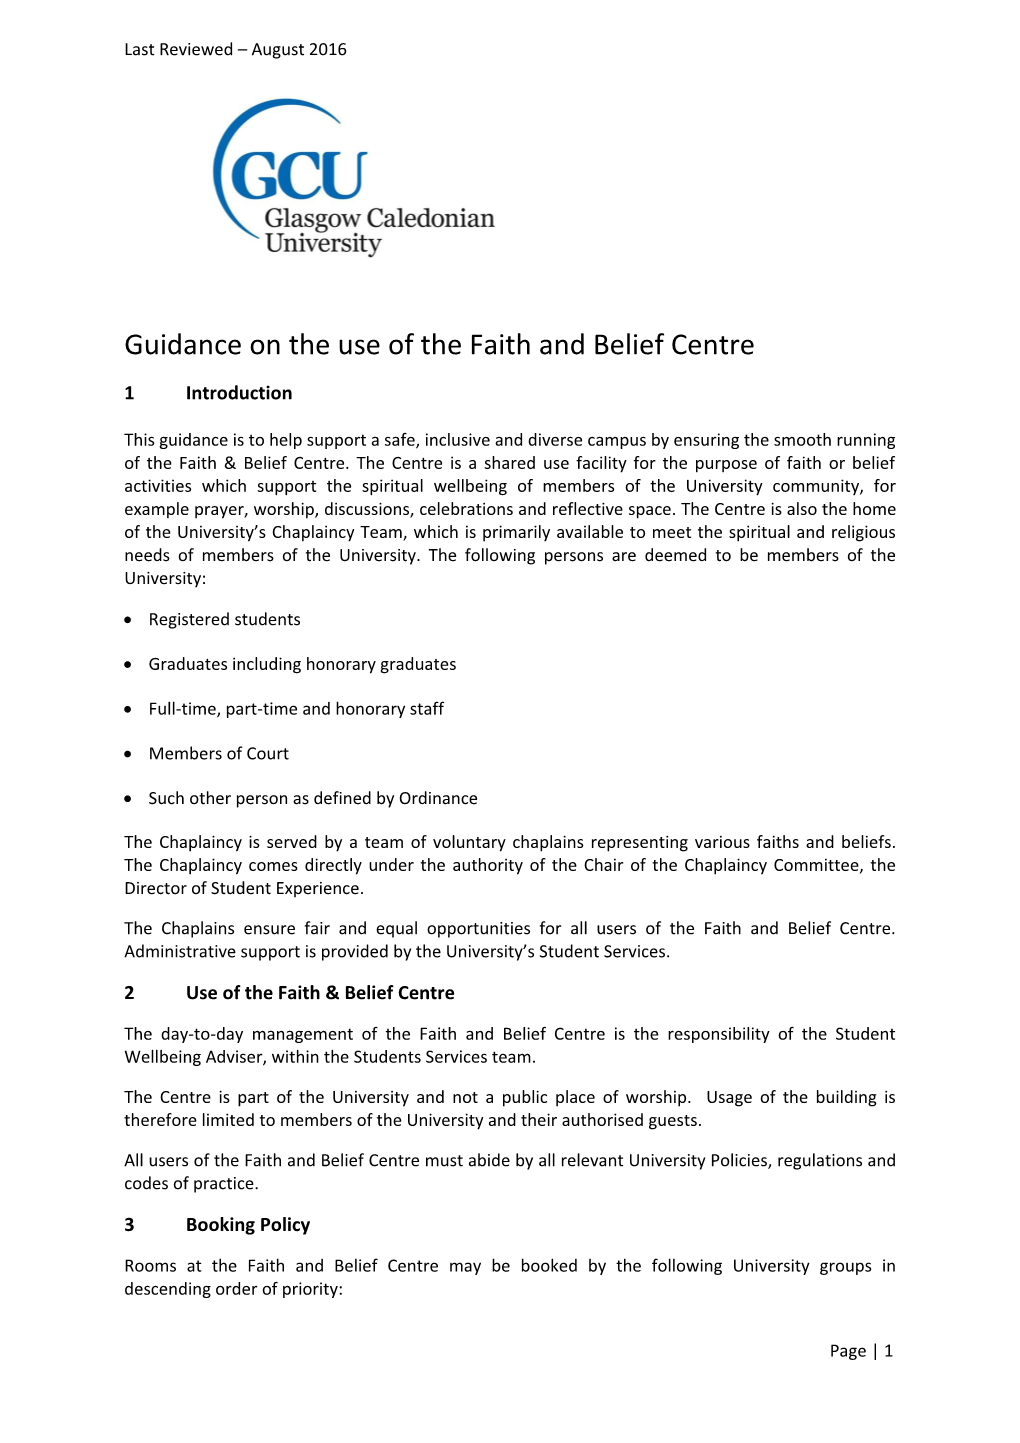 Guidance on the Use of the Faith and Belief Centre